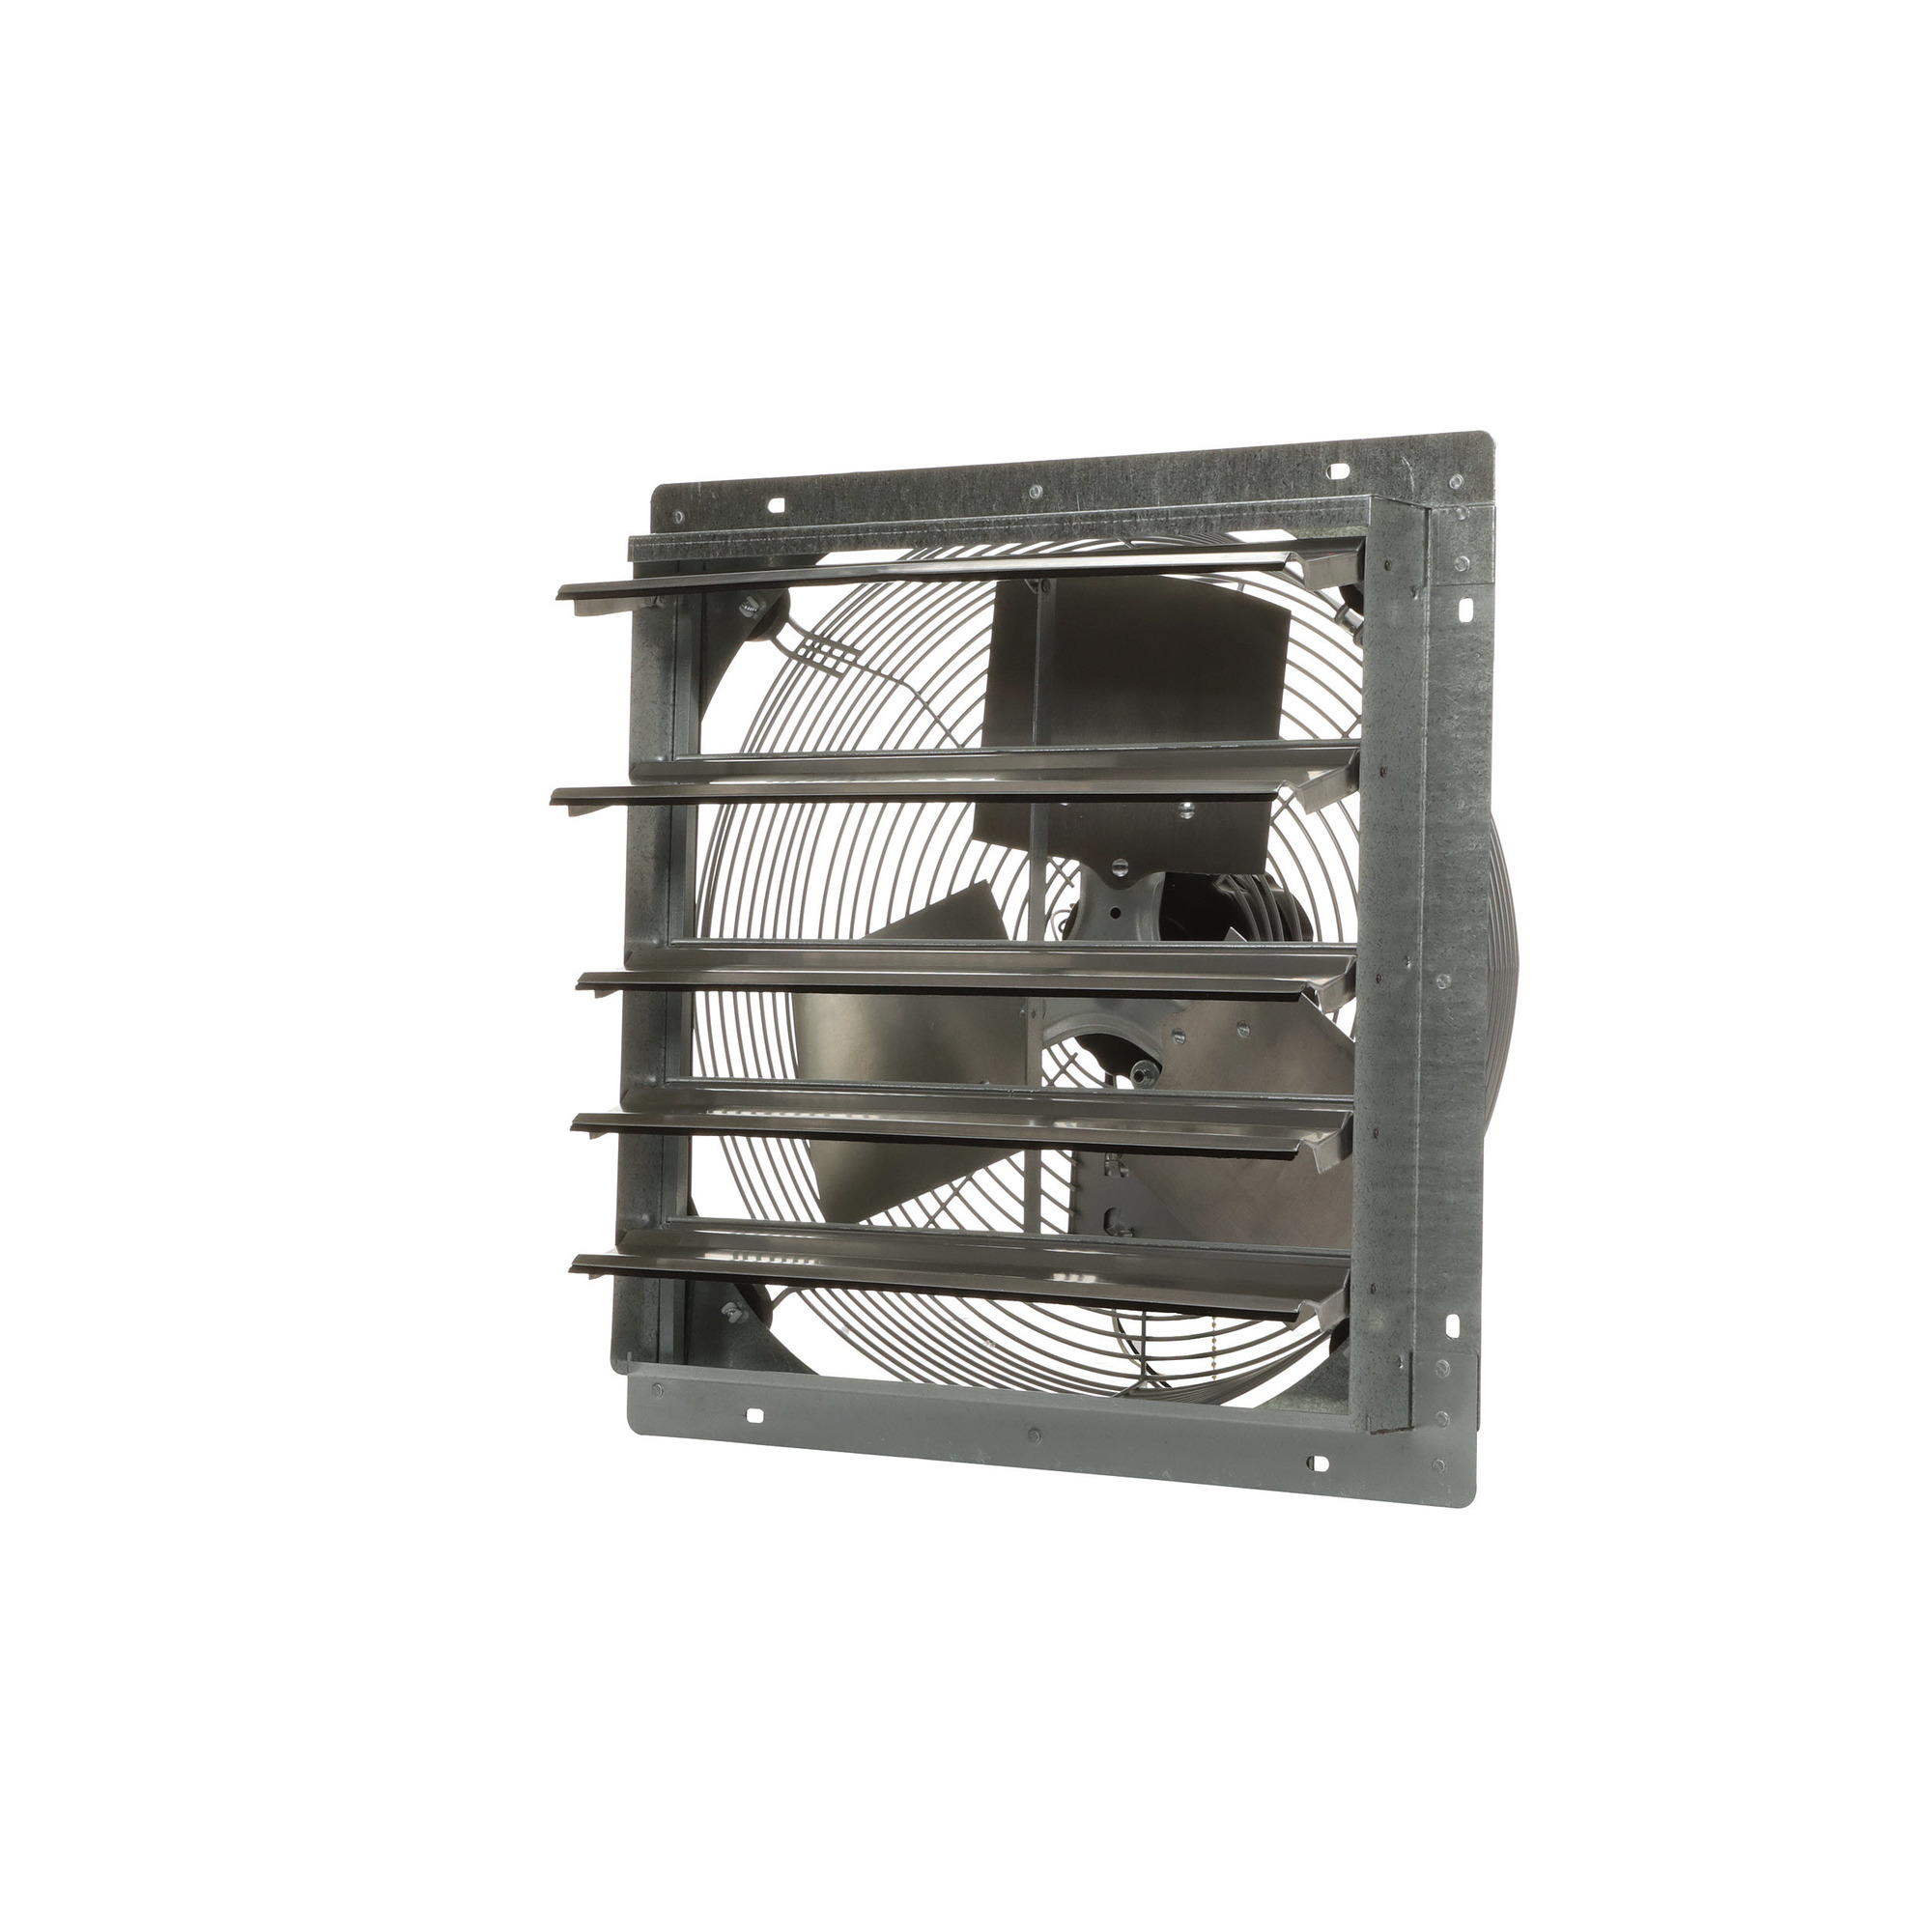 TPI, Shutter-Mounted Exhaust Fan, Drive Type Direct, Fan Diameter 18 in, Air Delivery 2300 cfm, Model CE18DS -  CE 18-DS